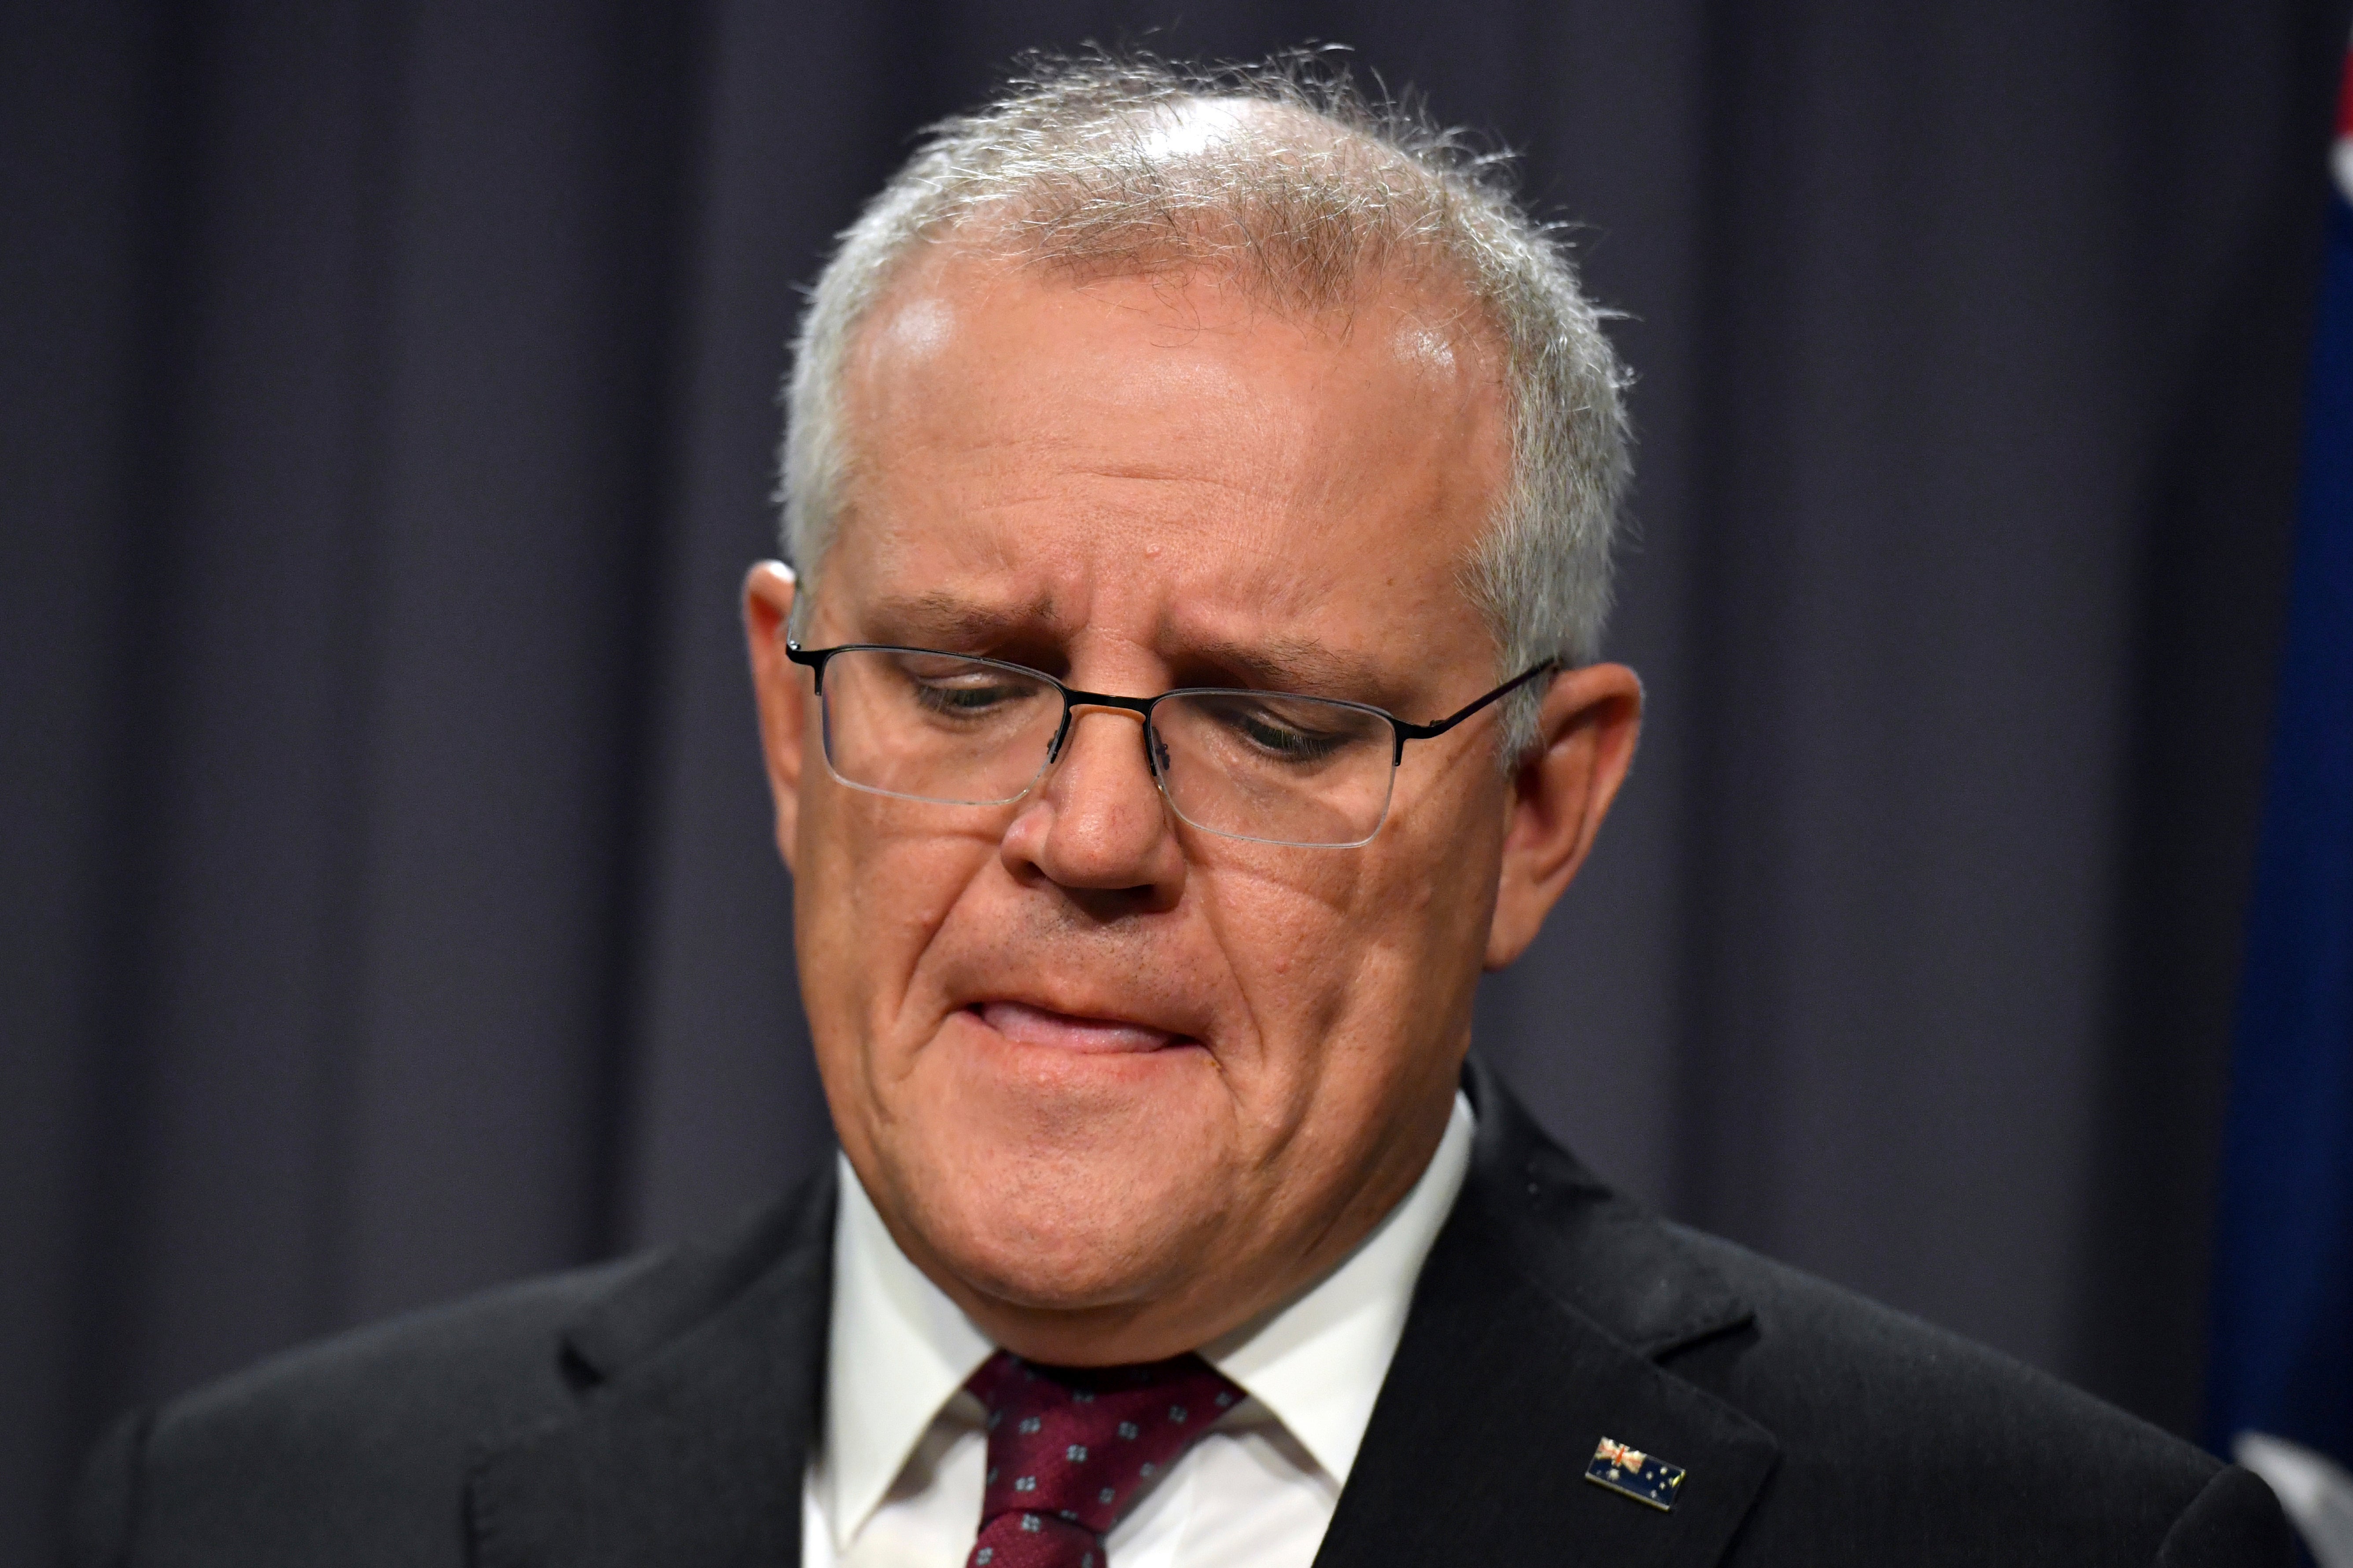 Australian Prime Minister Scott Morrison reacts to the videos surfaced of staffers performing ‘sickening’ act, while speaking during a press conference at Parliament House in Canberra